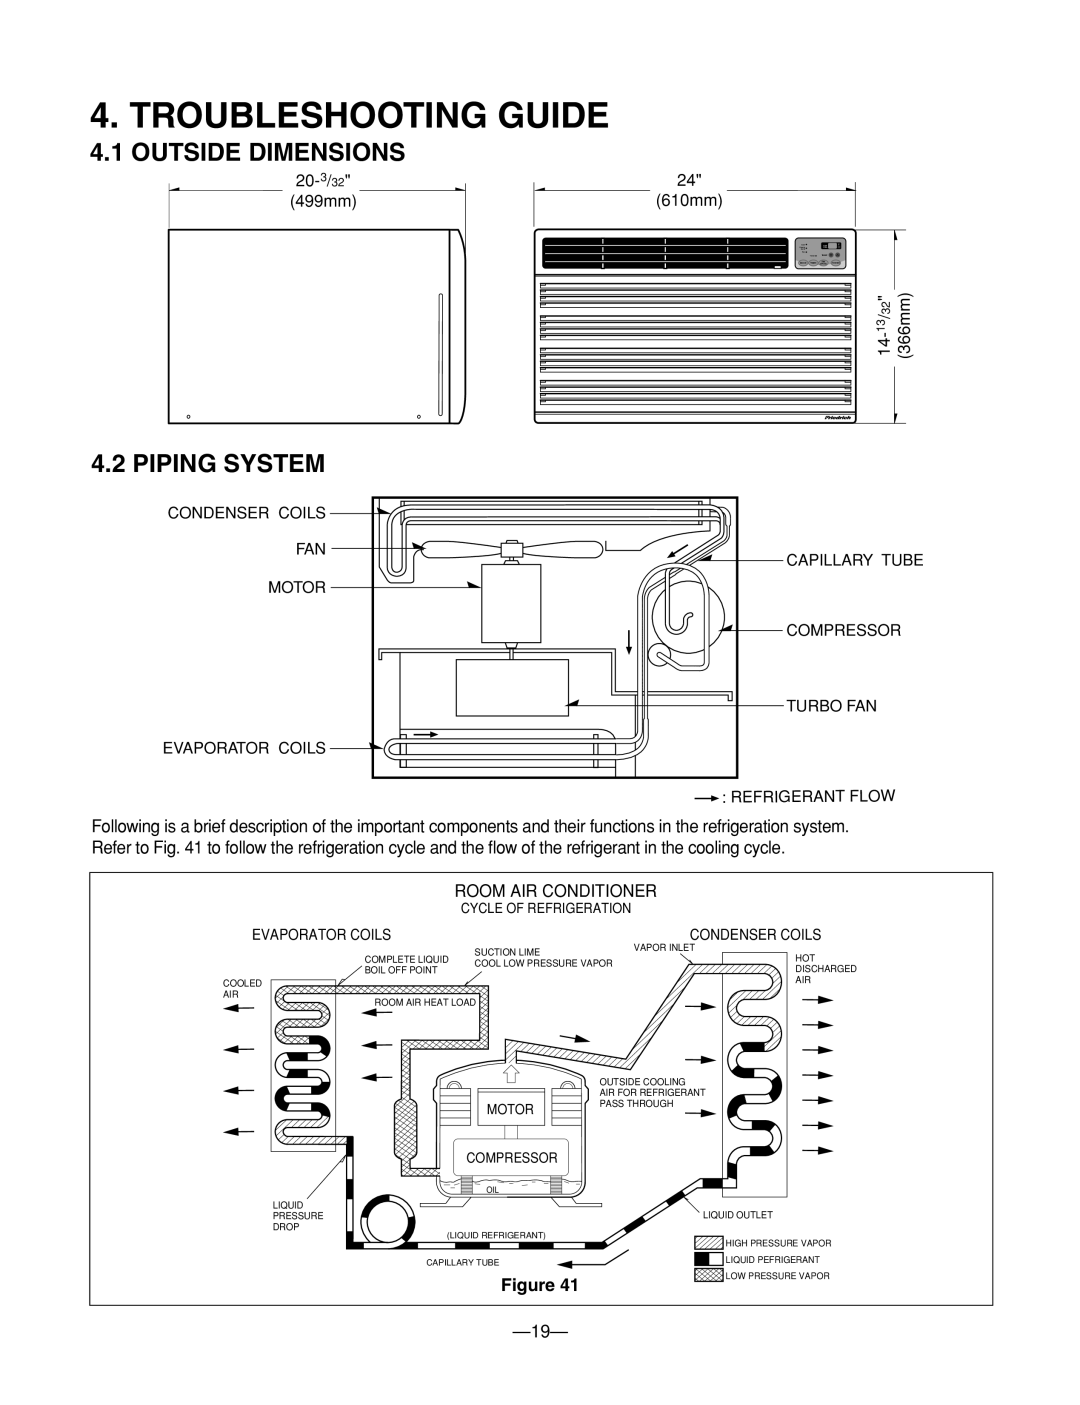 Heat Controller BG-103A service manual Troubleshooting Guide, Outside Dimensions, Piping System 